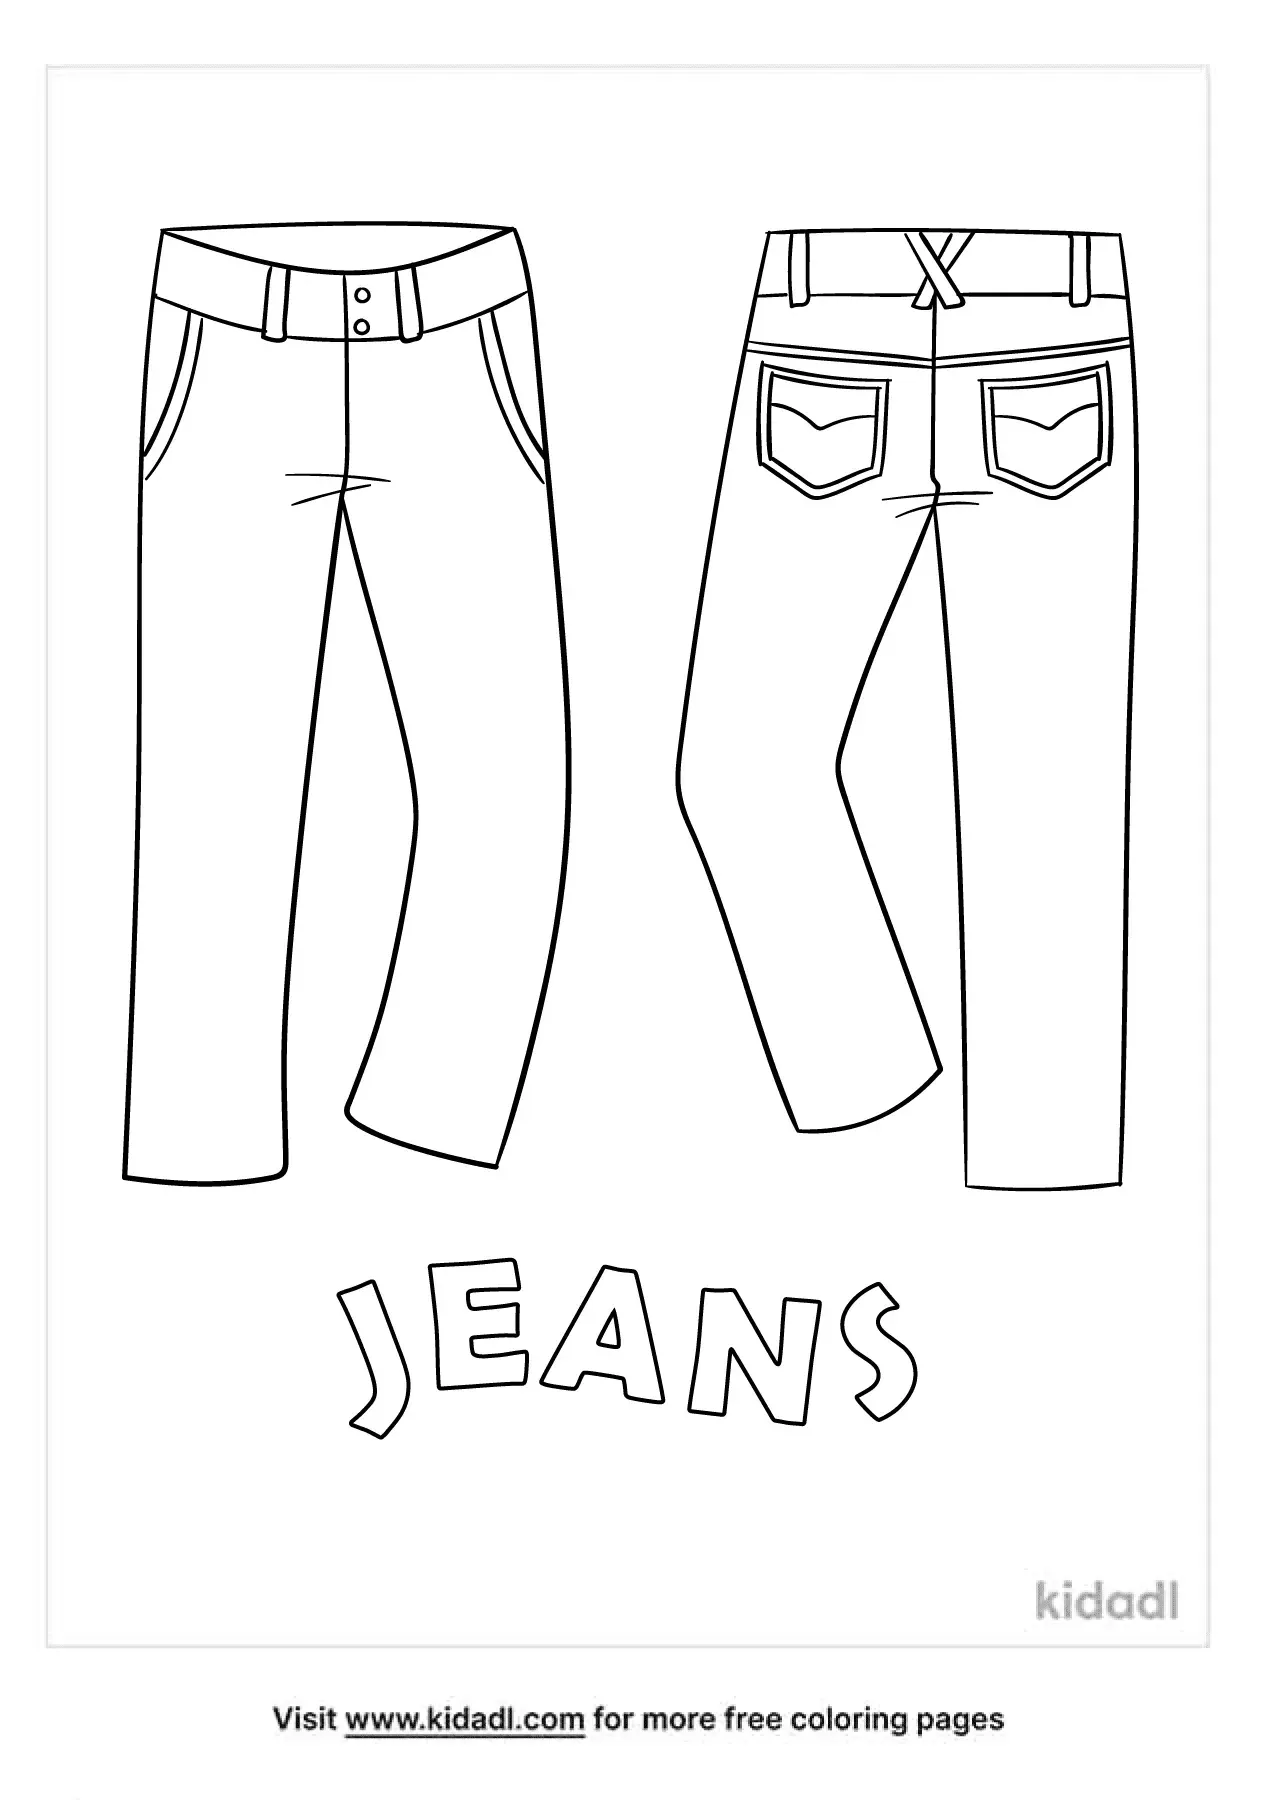 Sweats coloring page  Free Printable Coloring Pages